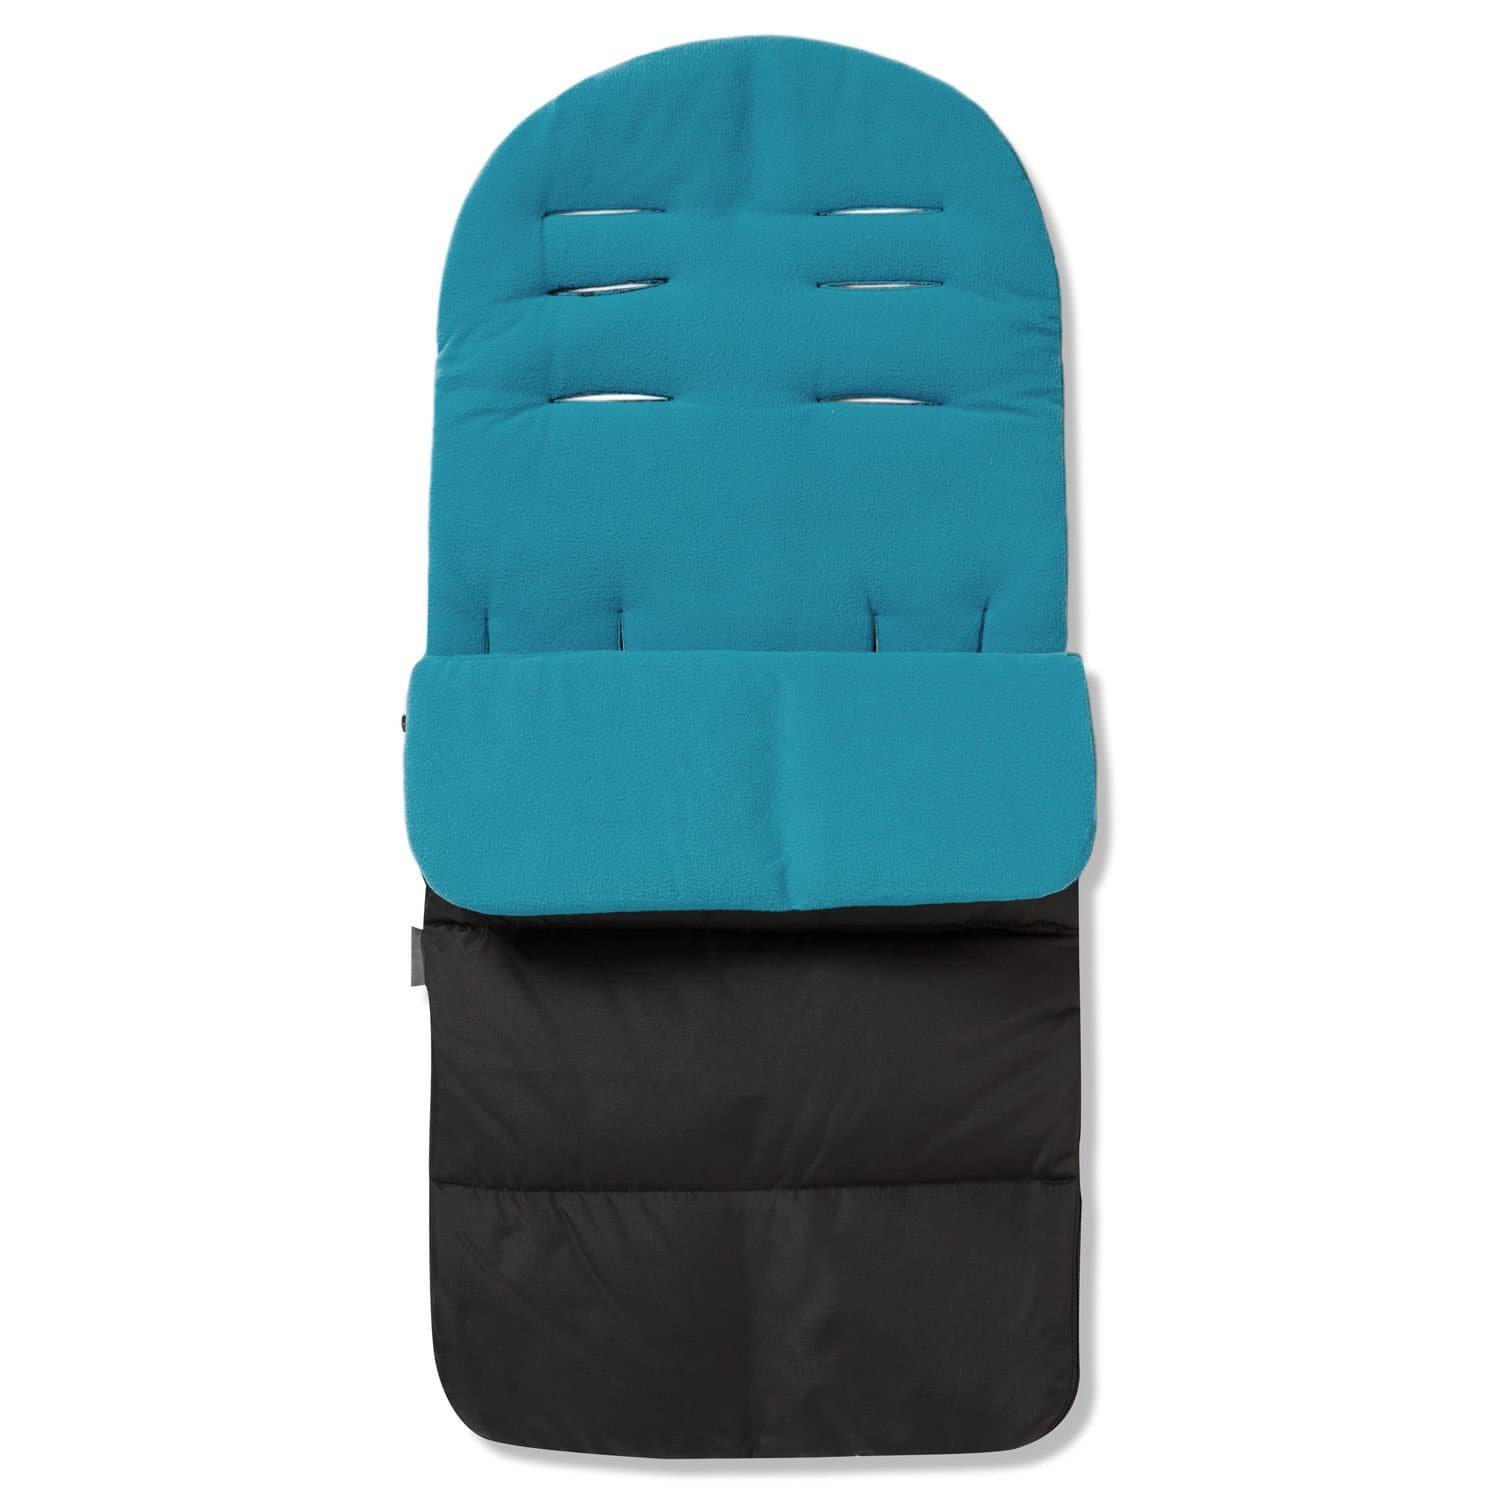 Premium Footmuff / Cosy Toes Compatible with Chicco - Ocean Blue / Fits All Models | For Your Little One